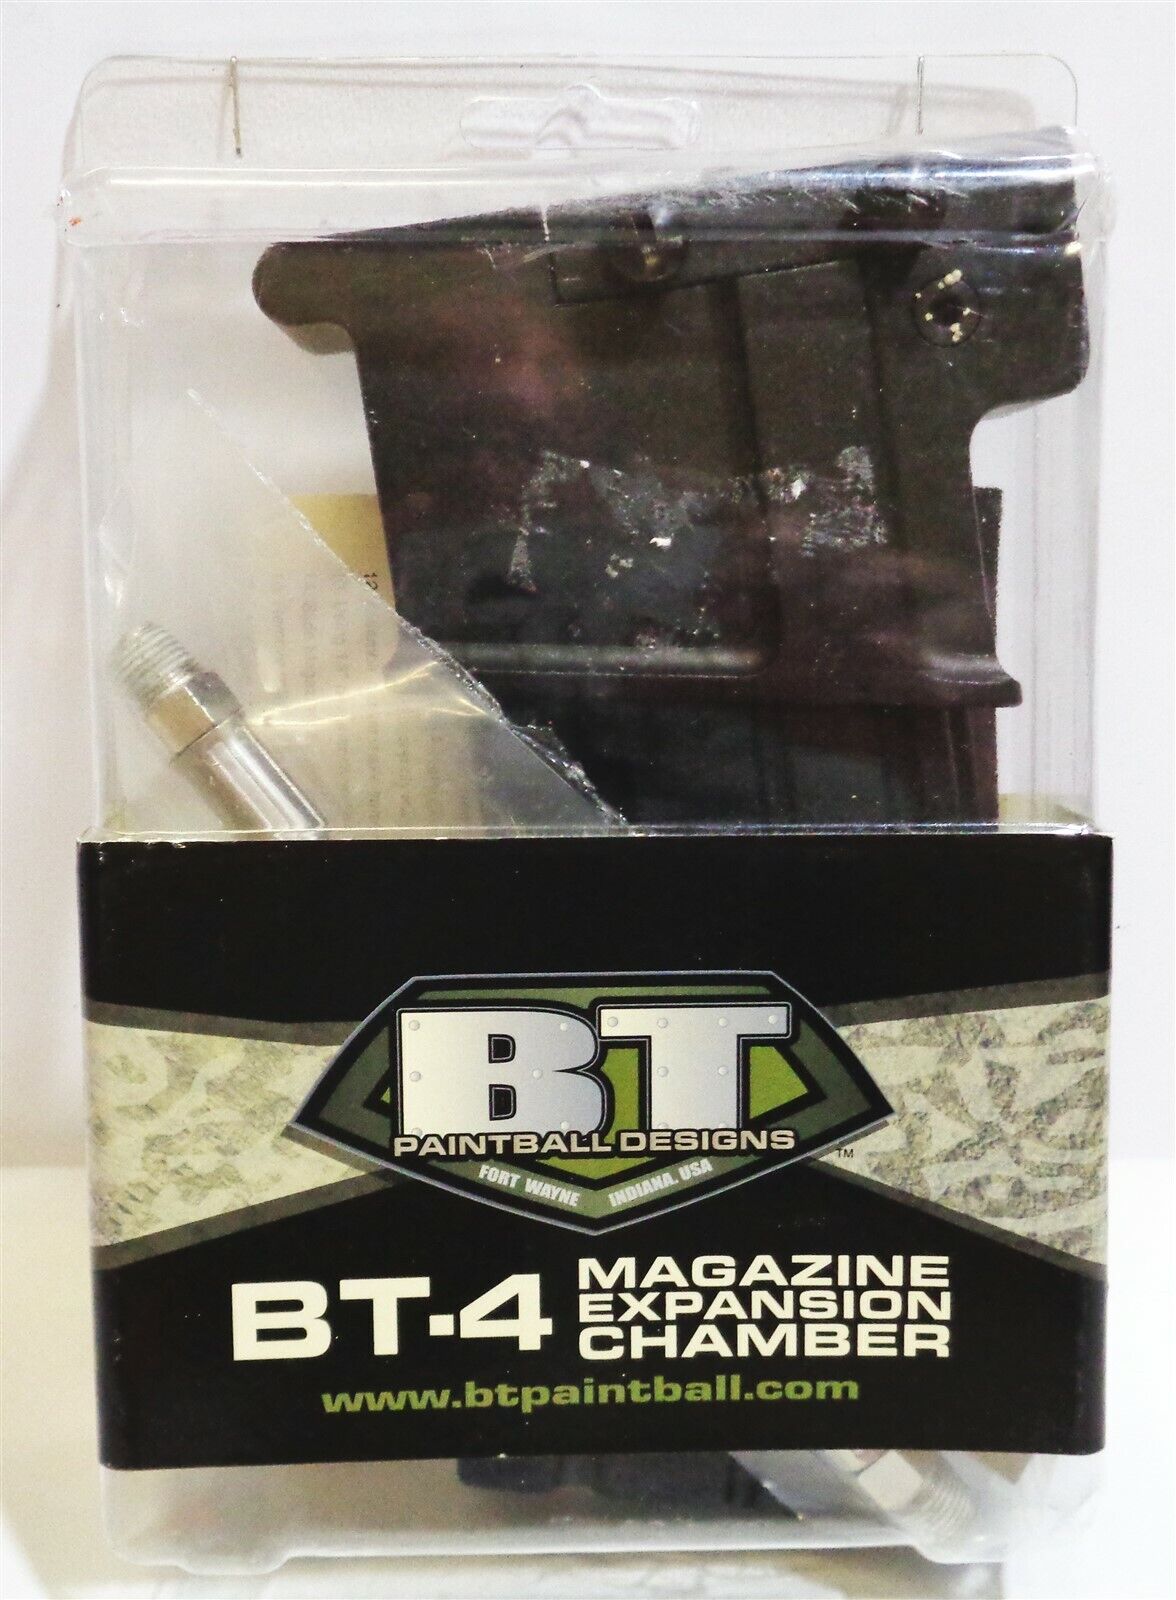 Paintball Designs Bt-4 Paintball Magazine Expansion Chamber New In Package